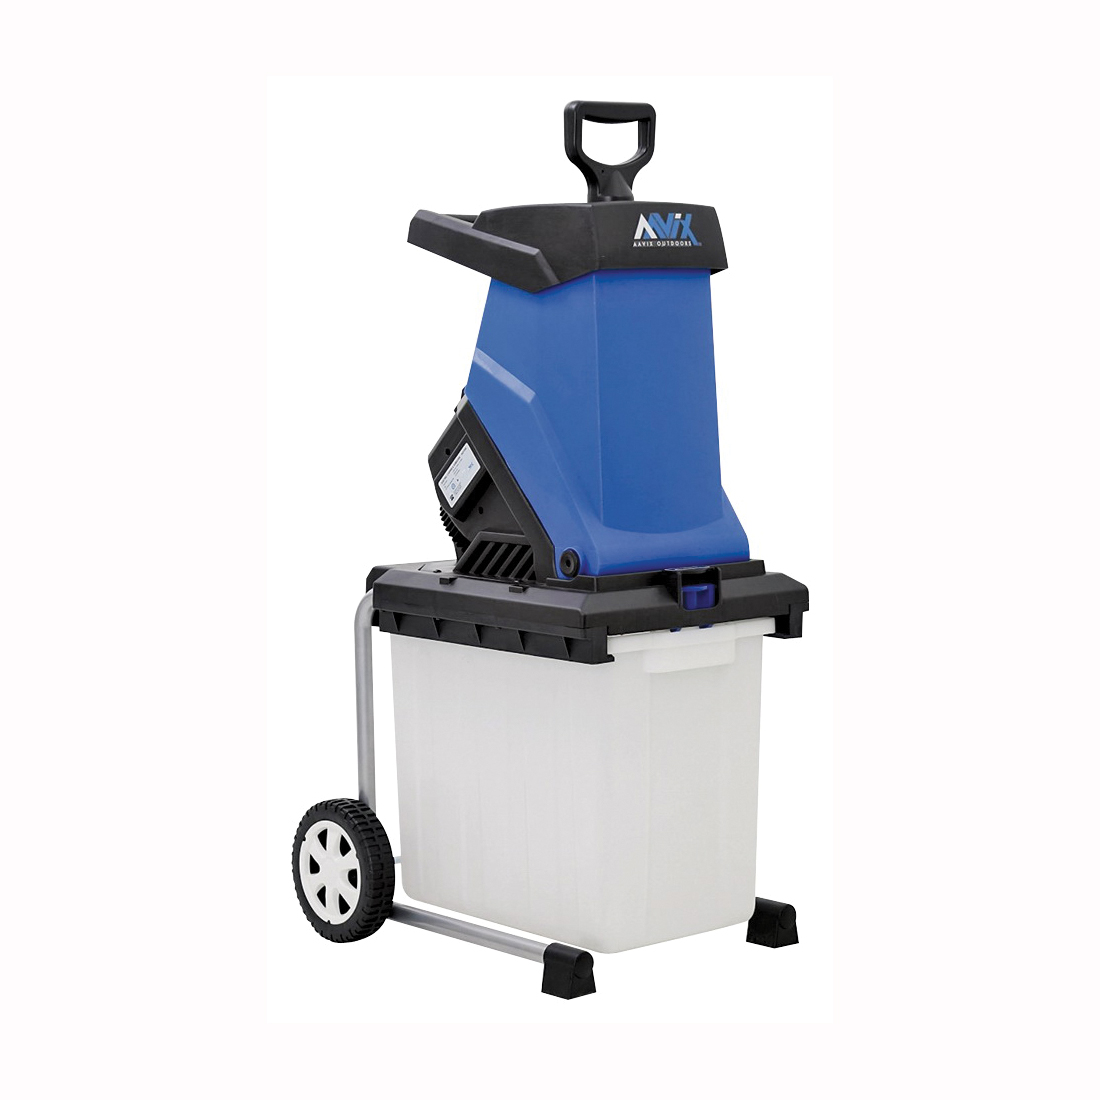 AGT308 Chipper and Shredder, Electric, 1.6 in Chipping, ABS, Blue